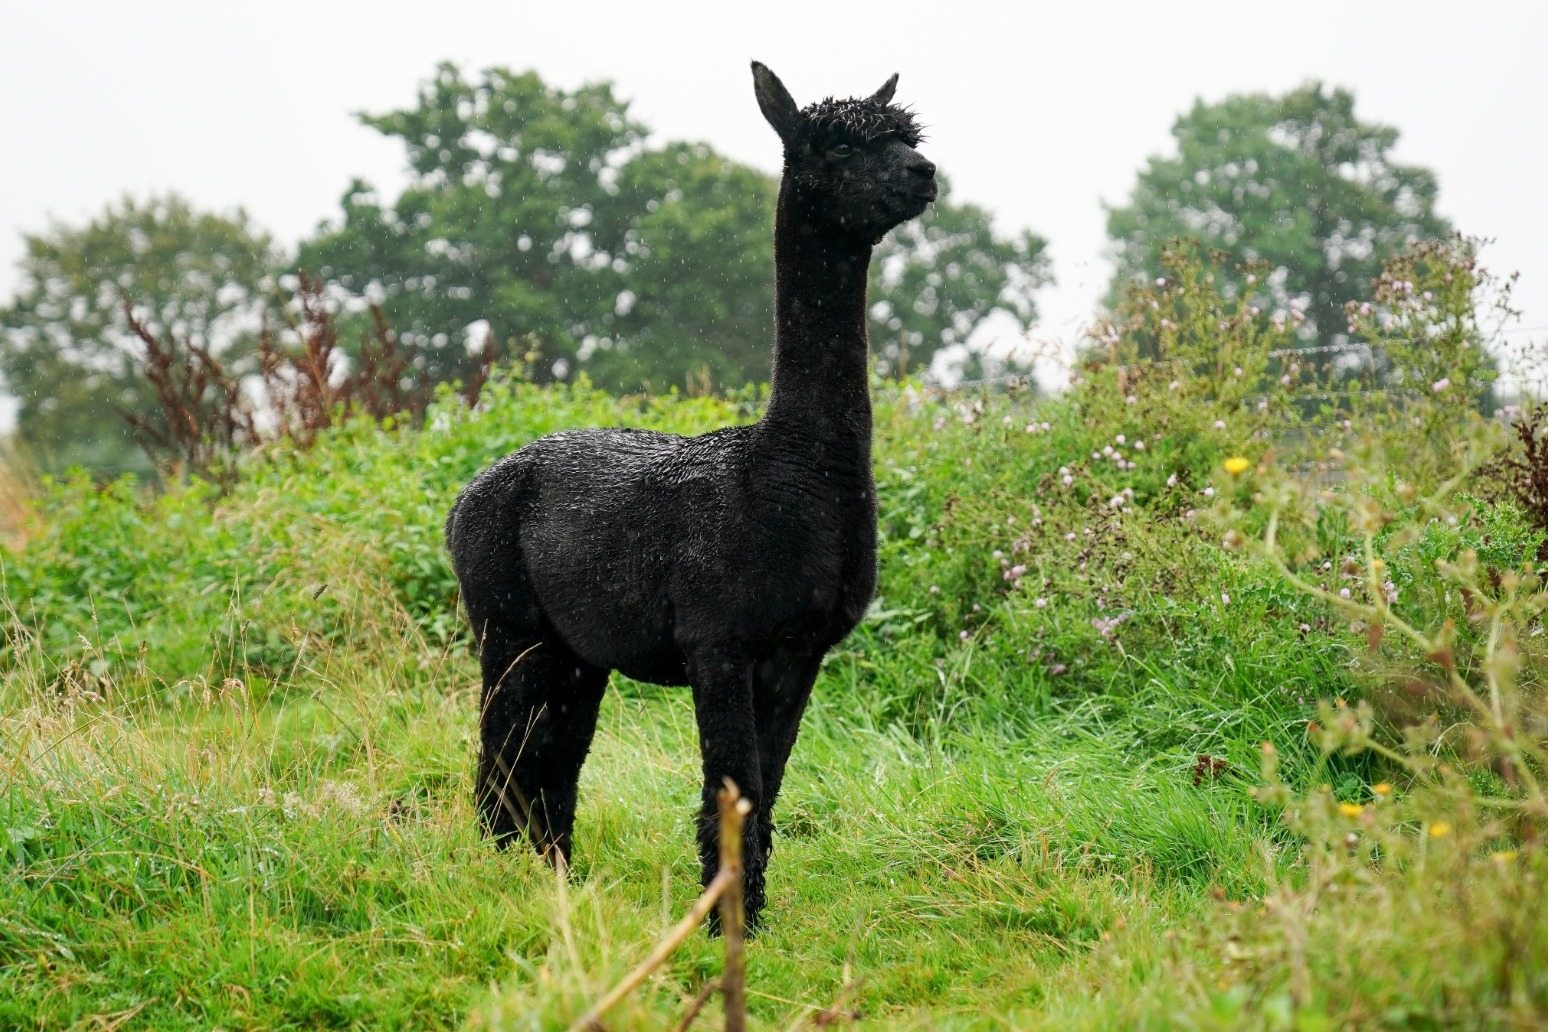 Geronimo’s owner ‘on high alert’ as alpaca awaits his fate 